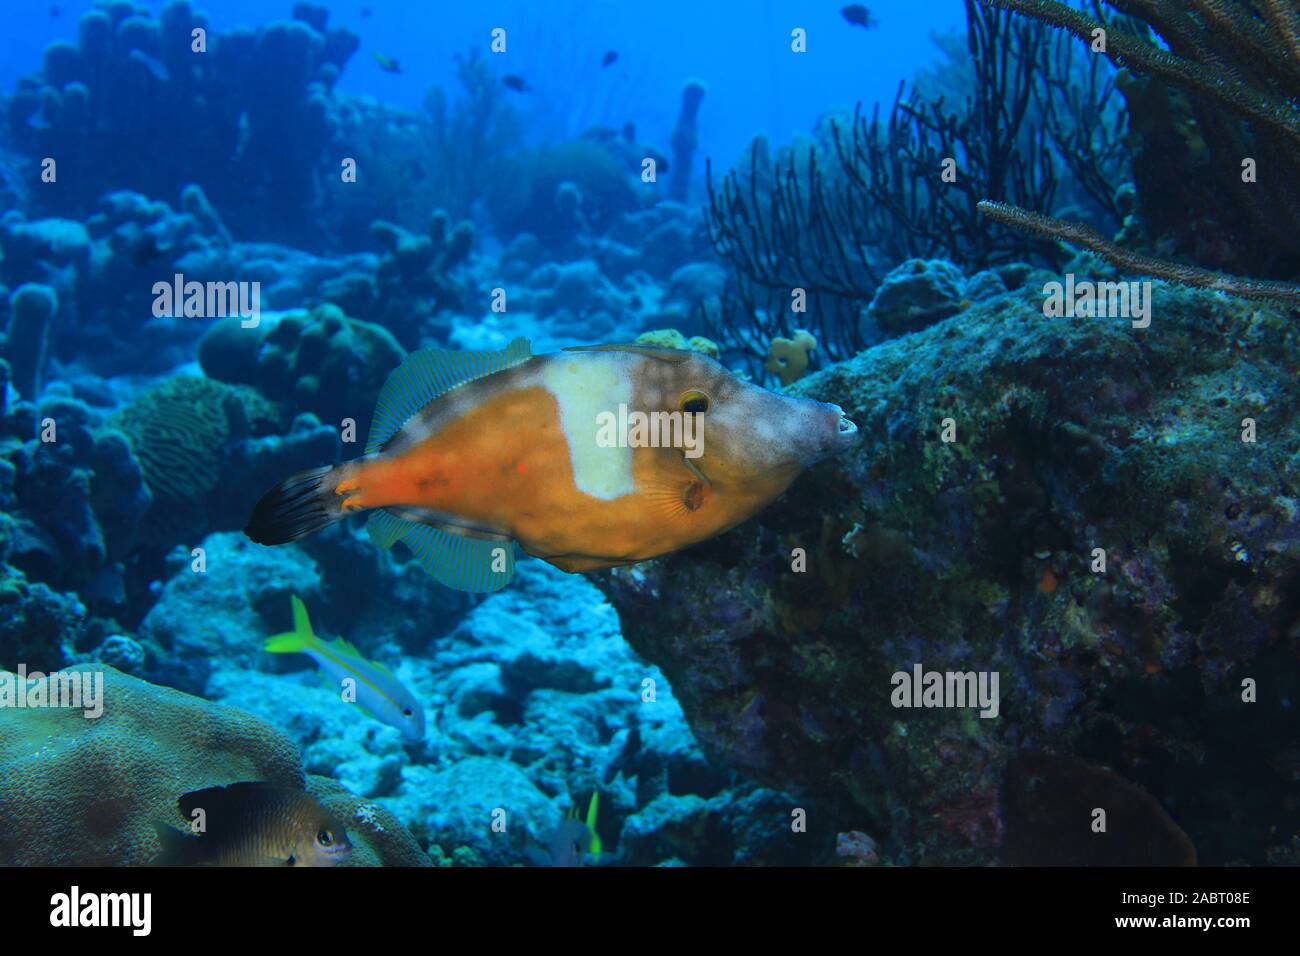 American whitespotted filefish (Cantherhines macrocerus) underwater in the caribbean sea of Bonaire Stock Photo